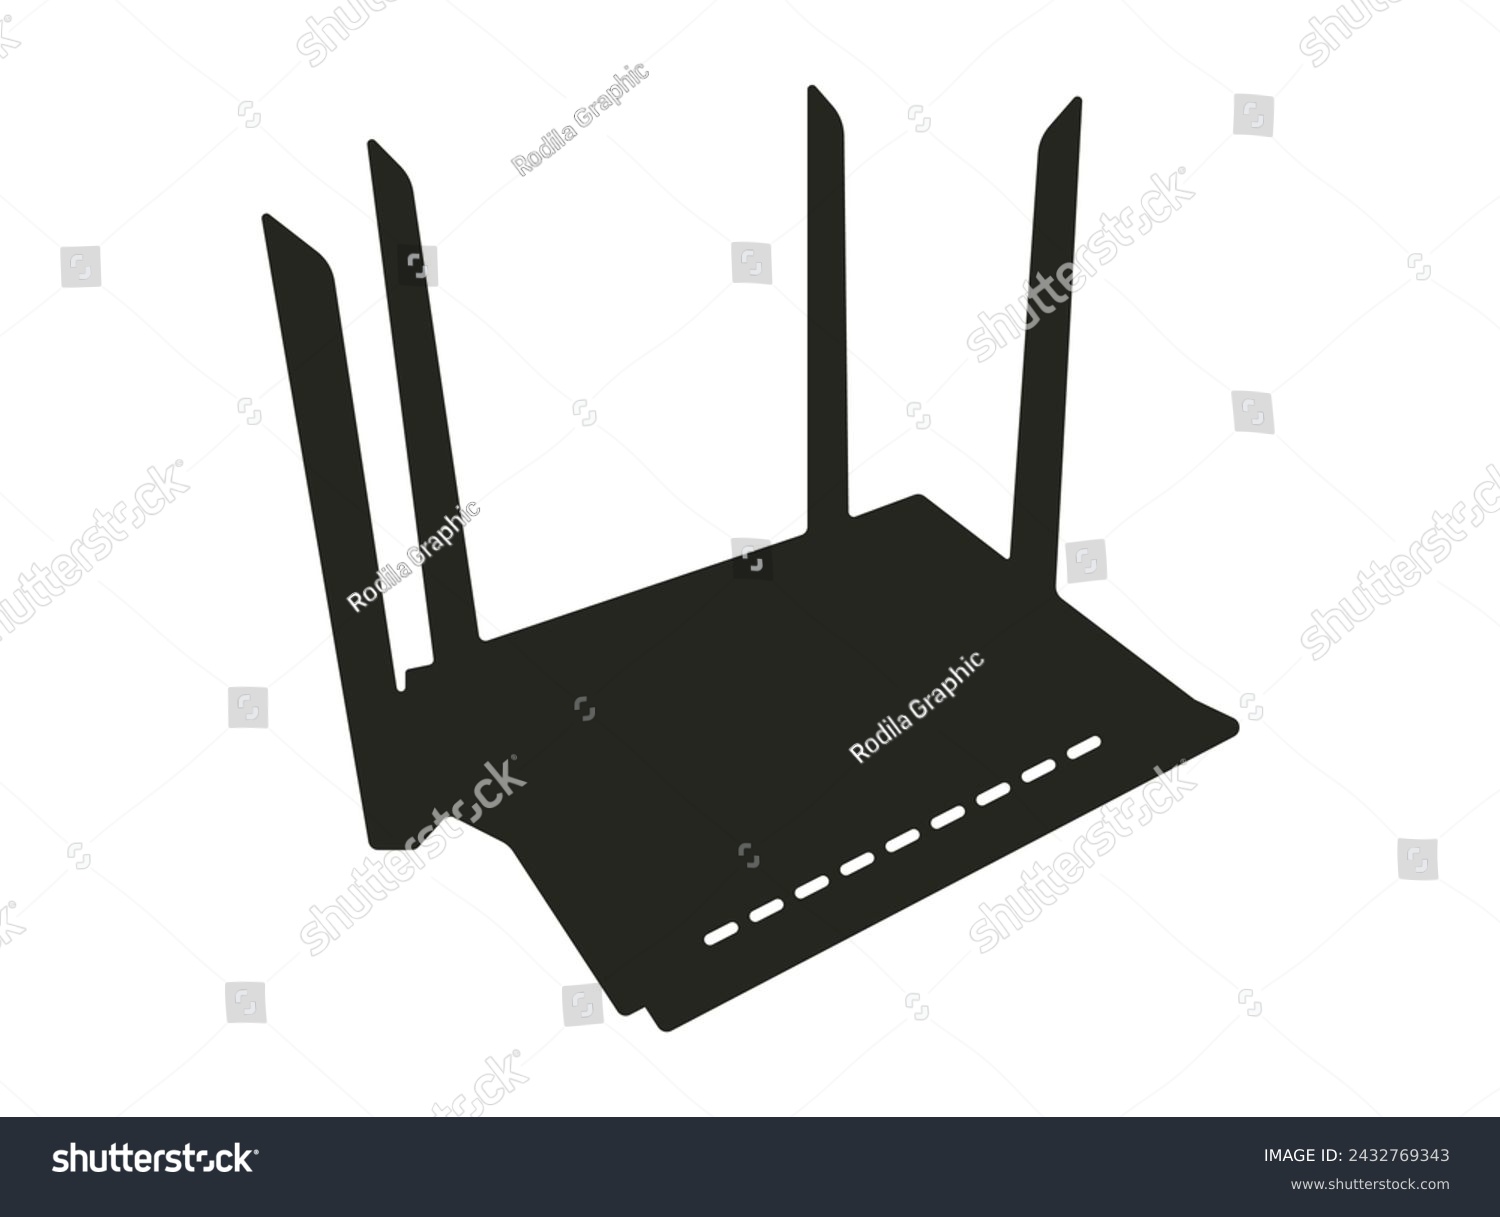 SVG of Experience seamless connectivity with our advanced Wi-Fi router. High-speed performance, wide coverage, and robust security features ensure uninterrupted internet access for all your devices. svg